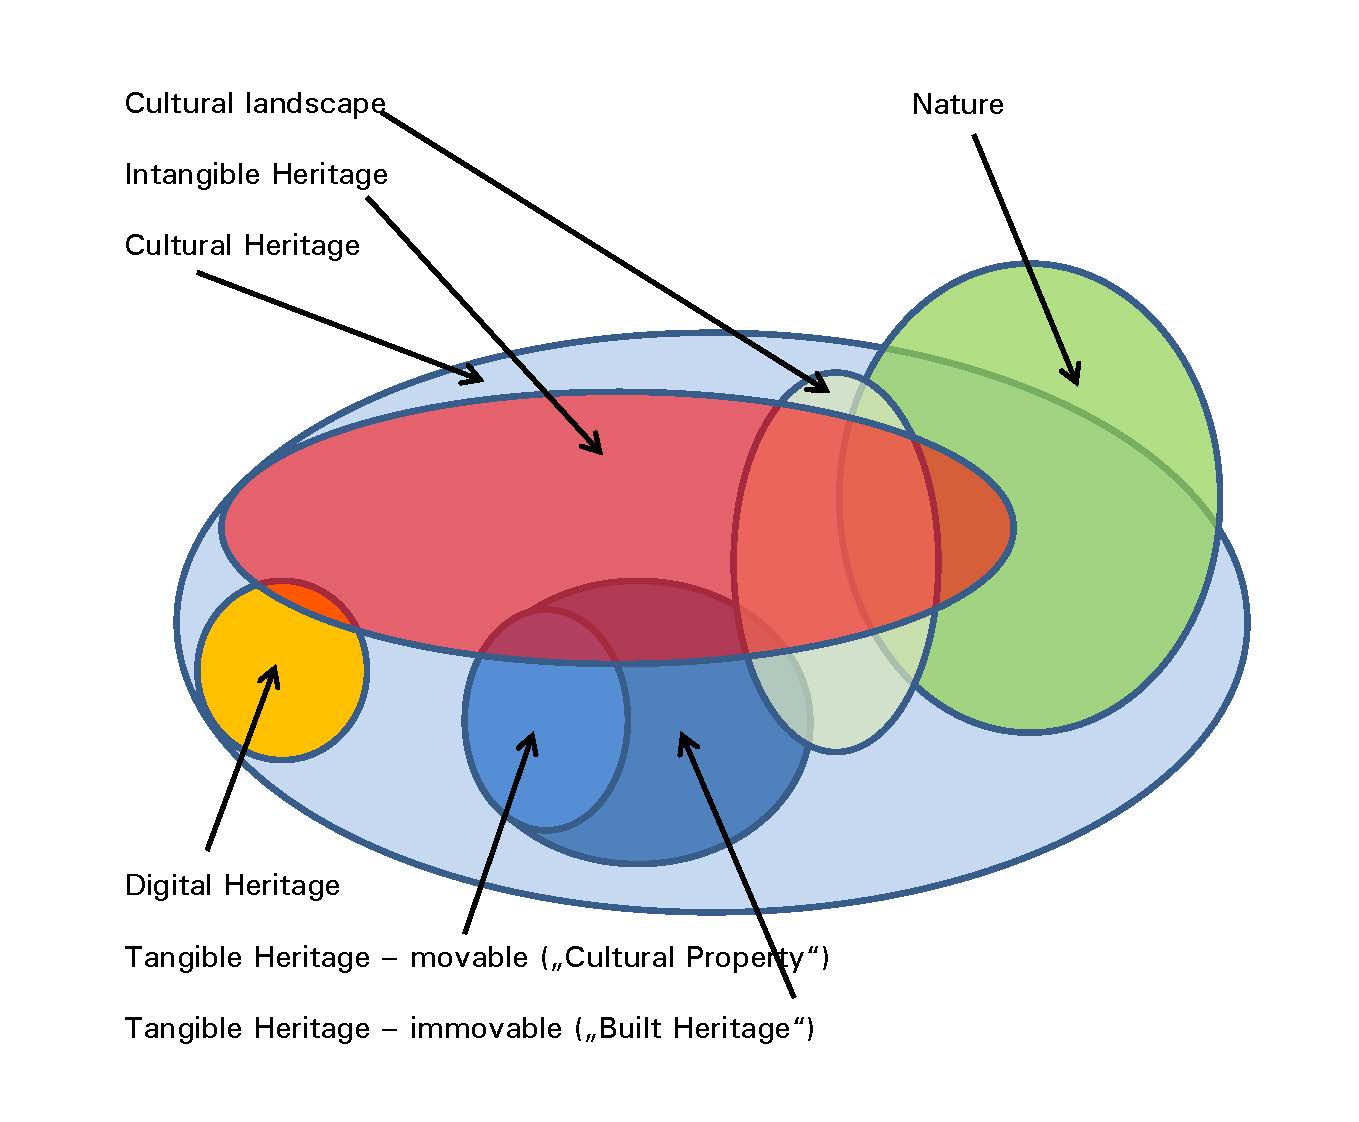 Universe of Cultural Heritage